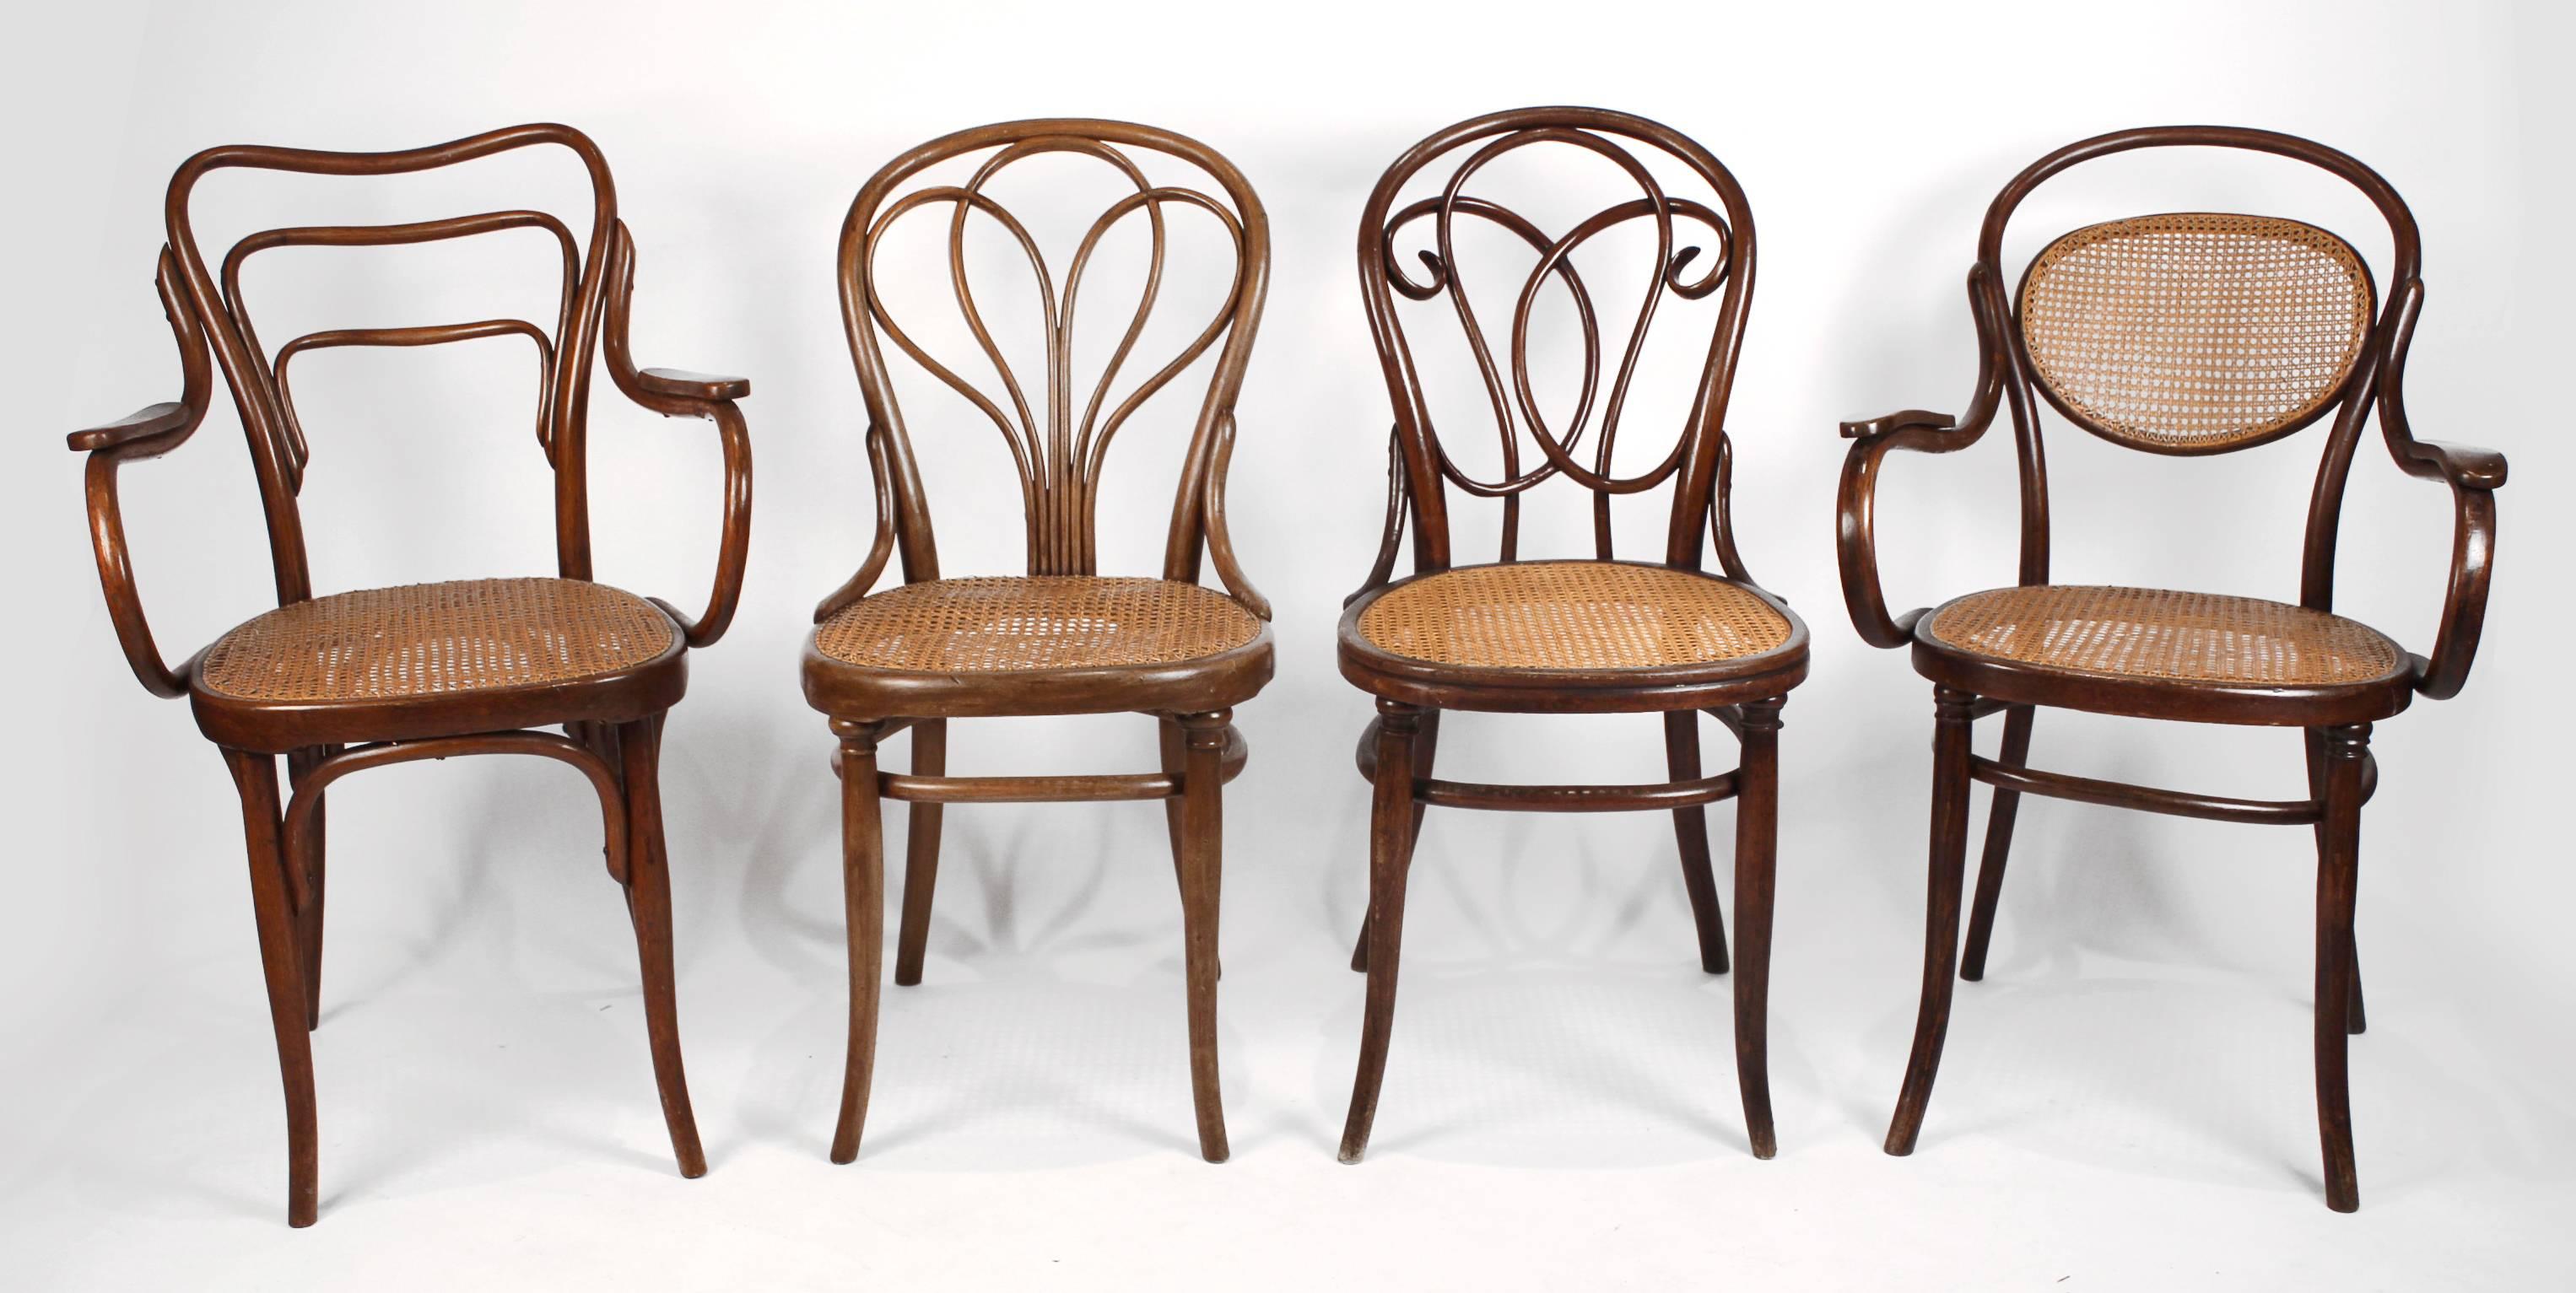 From the estate of a prominent Dallas architect, this set of eight bentwood Austrian dining chairs was carefully curated over the years and is comprised of two armchairs and six side chairs. A number of the chairs retain their original labels. They